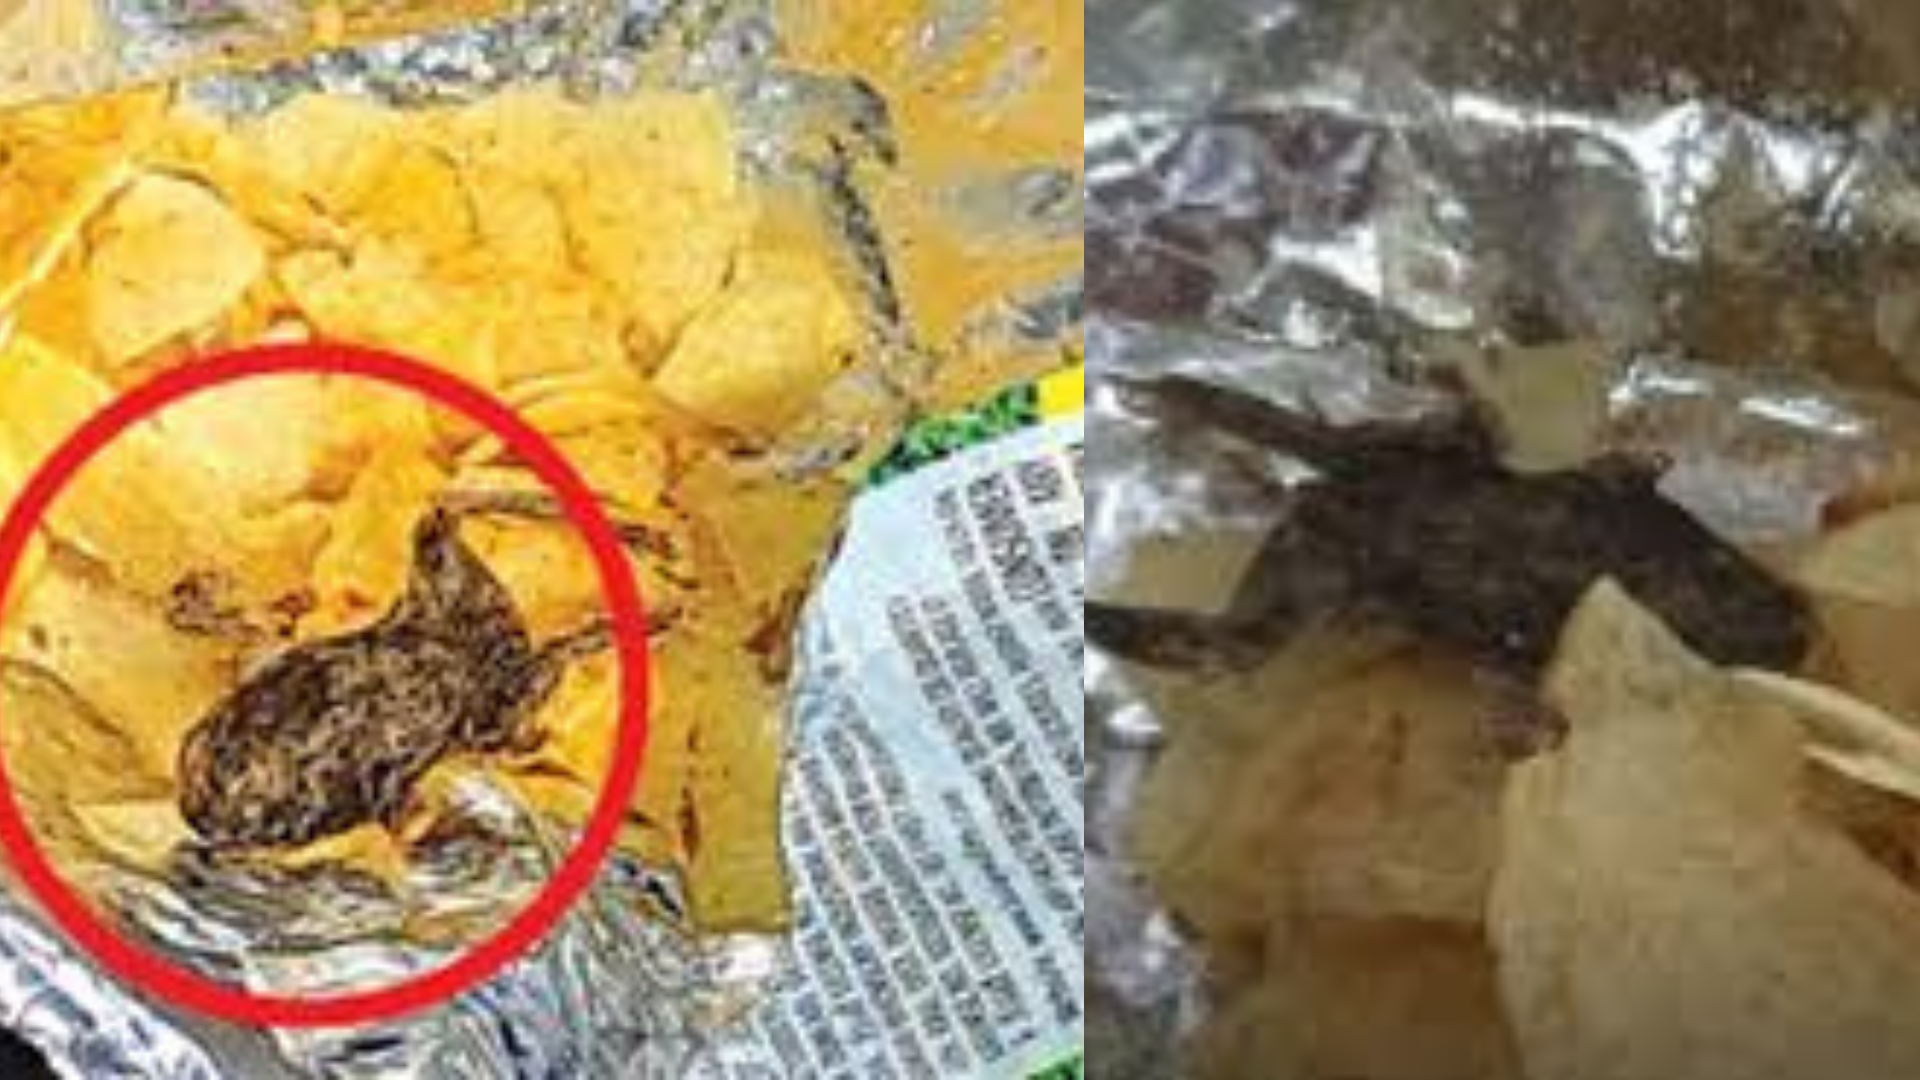 Viral: Dead Frog Reportedly Discovered In Packet Of Wafers In Gujarat